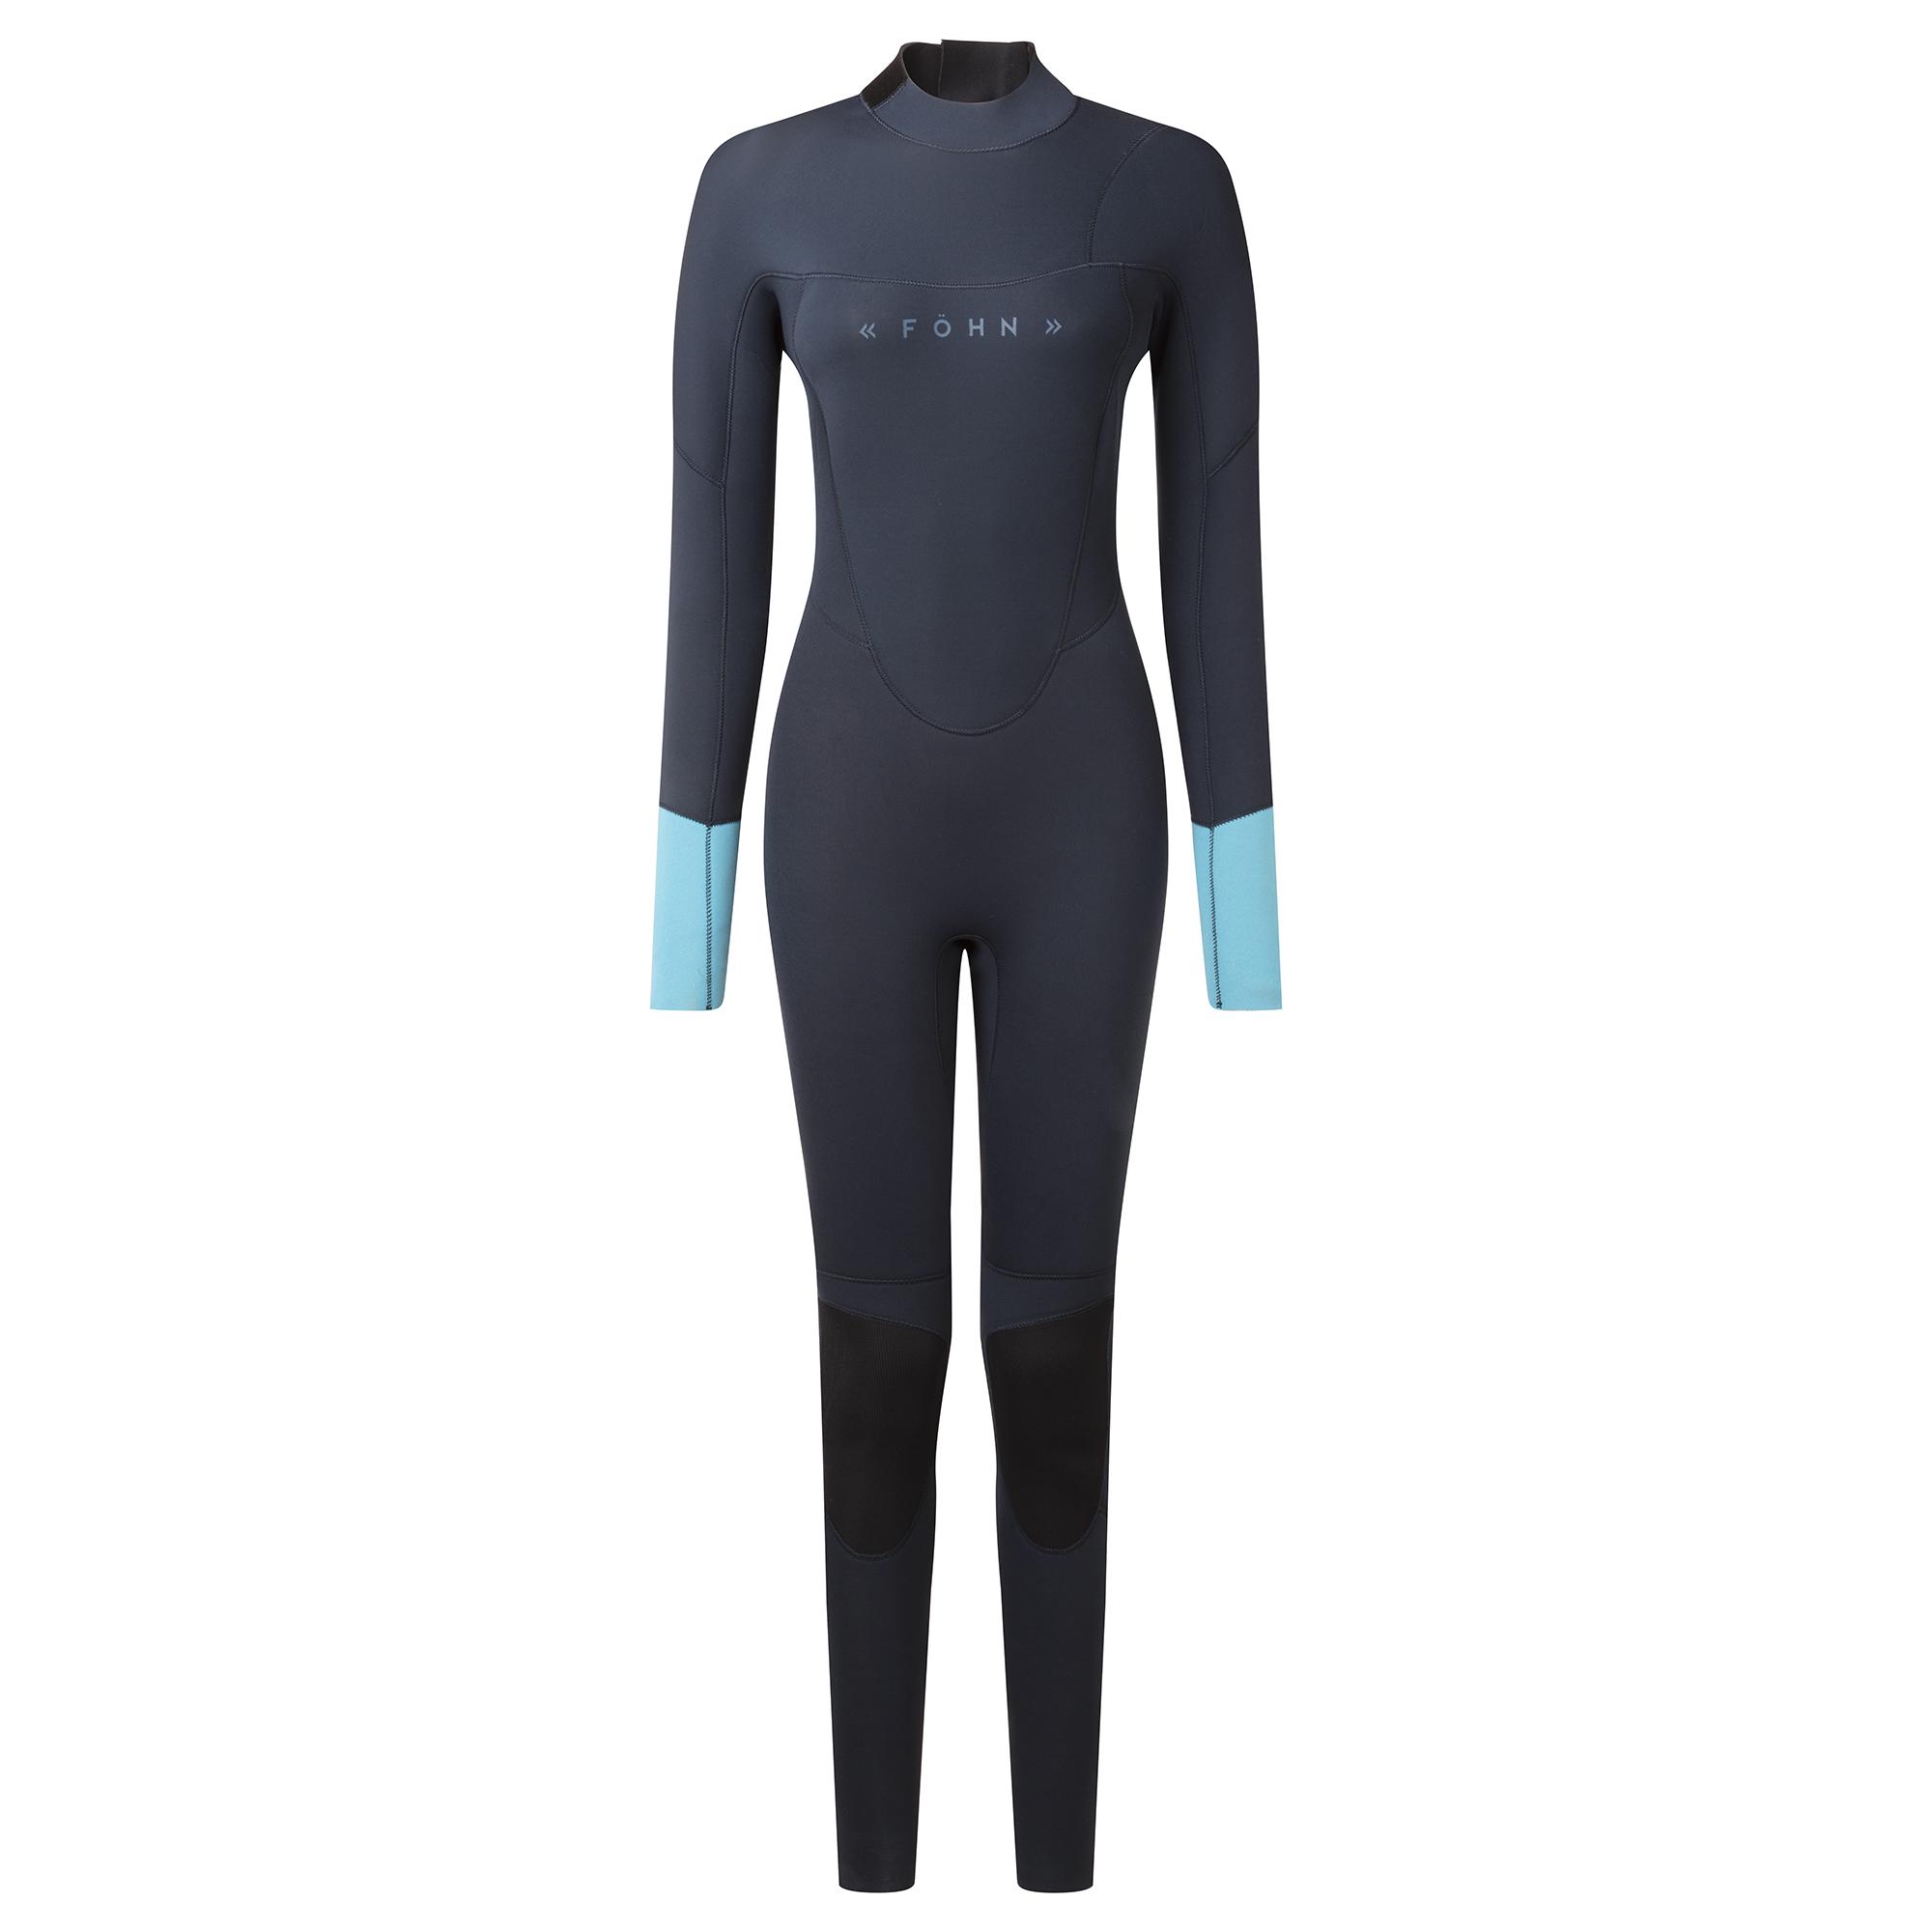 Fhn Womens 4/3 Thermal Wetsuit - Navy